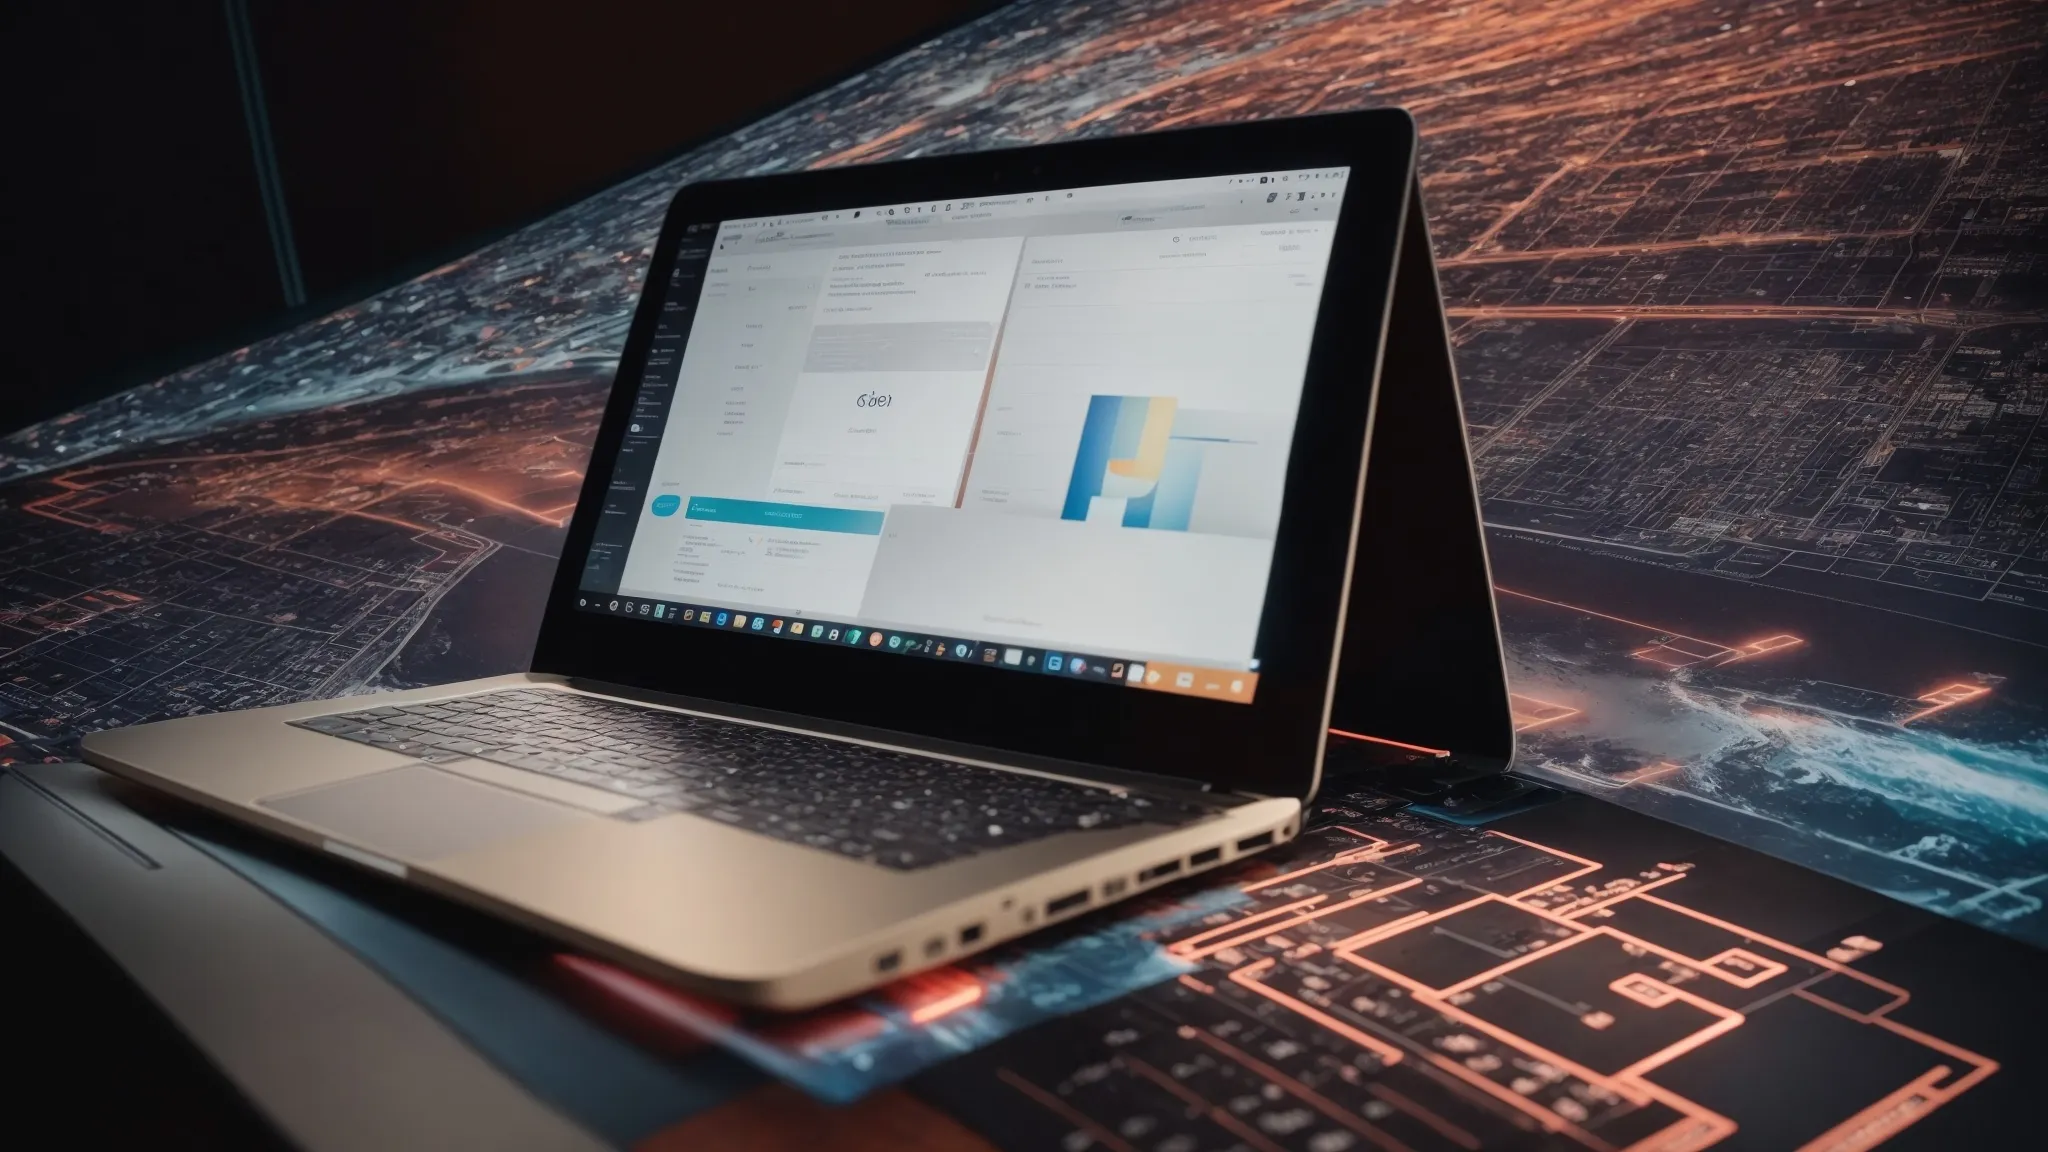 three distinct paths converging at the point where a laptop rests on a table with an illuminated screen surrounded by symbols representing analytics, ads, and creativity.